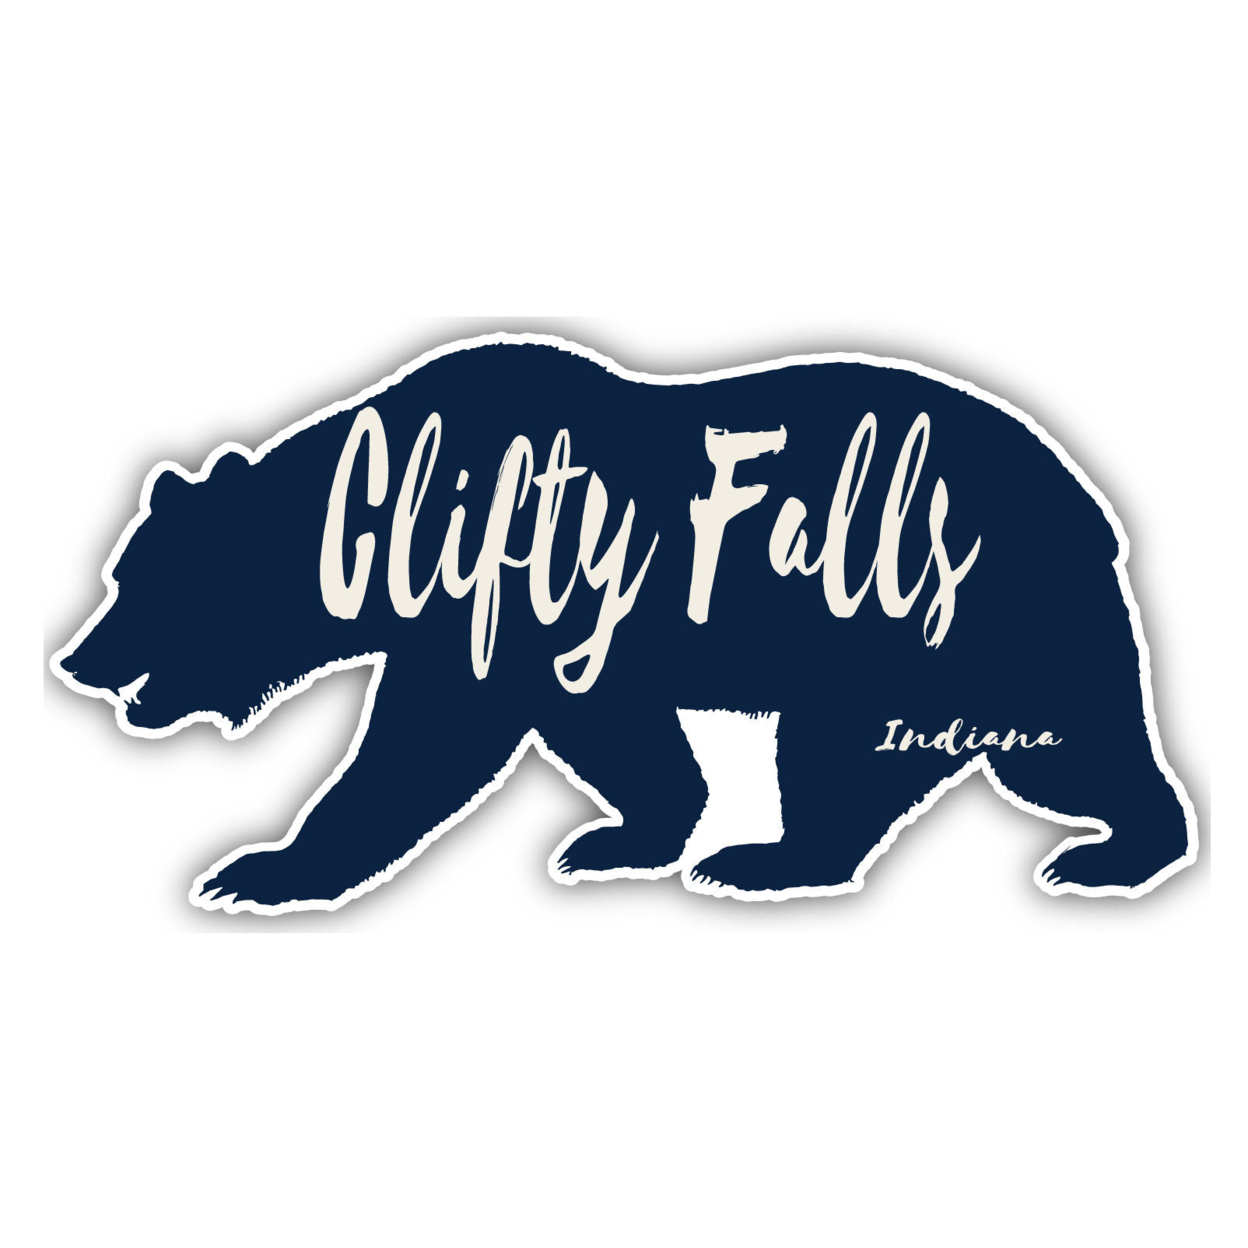 Clifty Falls Indiana Souvenir Decorative Stickers (Choose Theme And Size) - Single Unit, 6-Inch, Great Outdoors